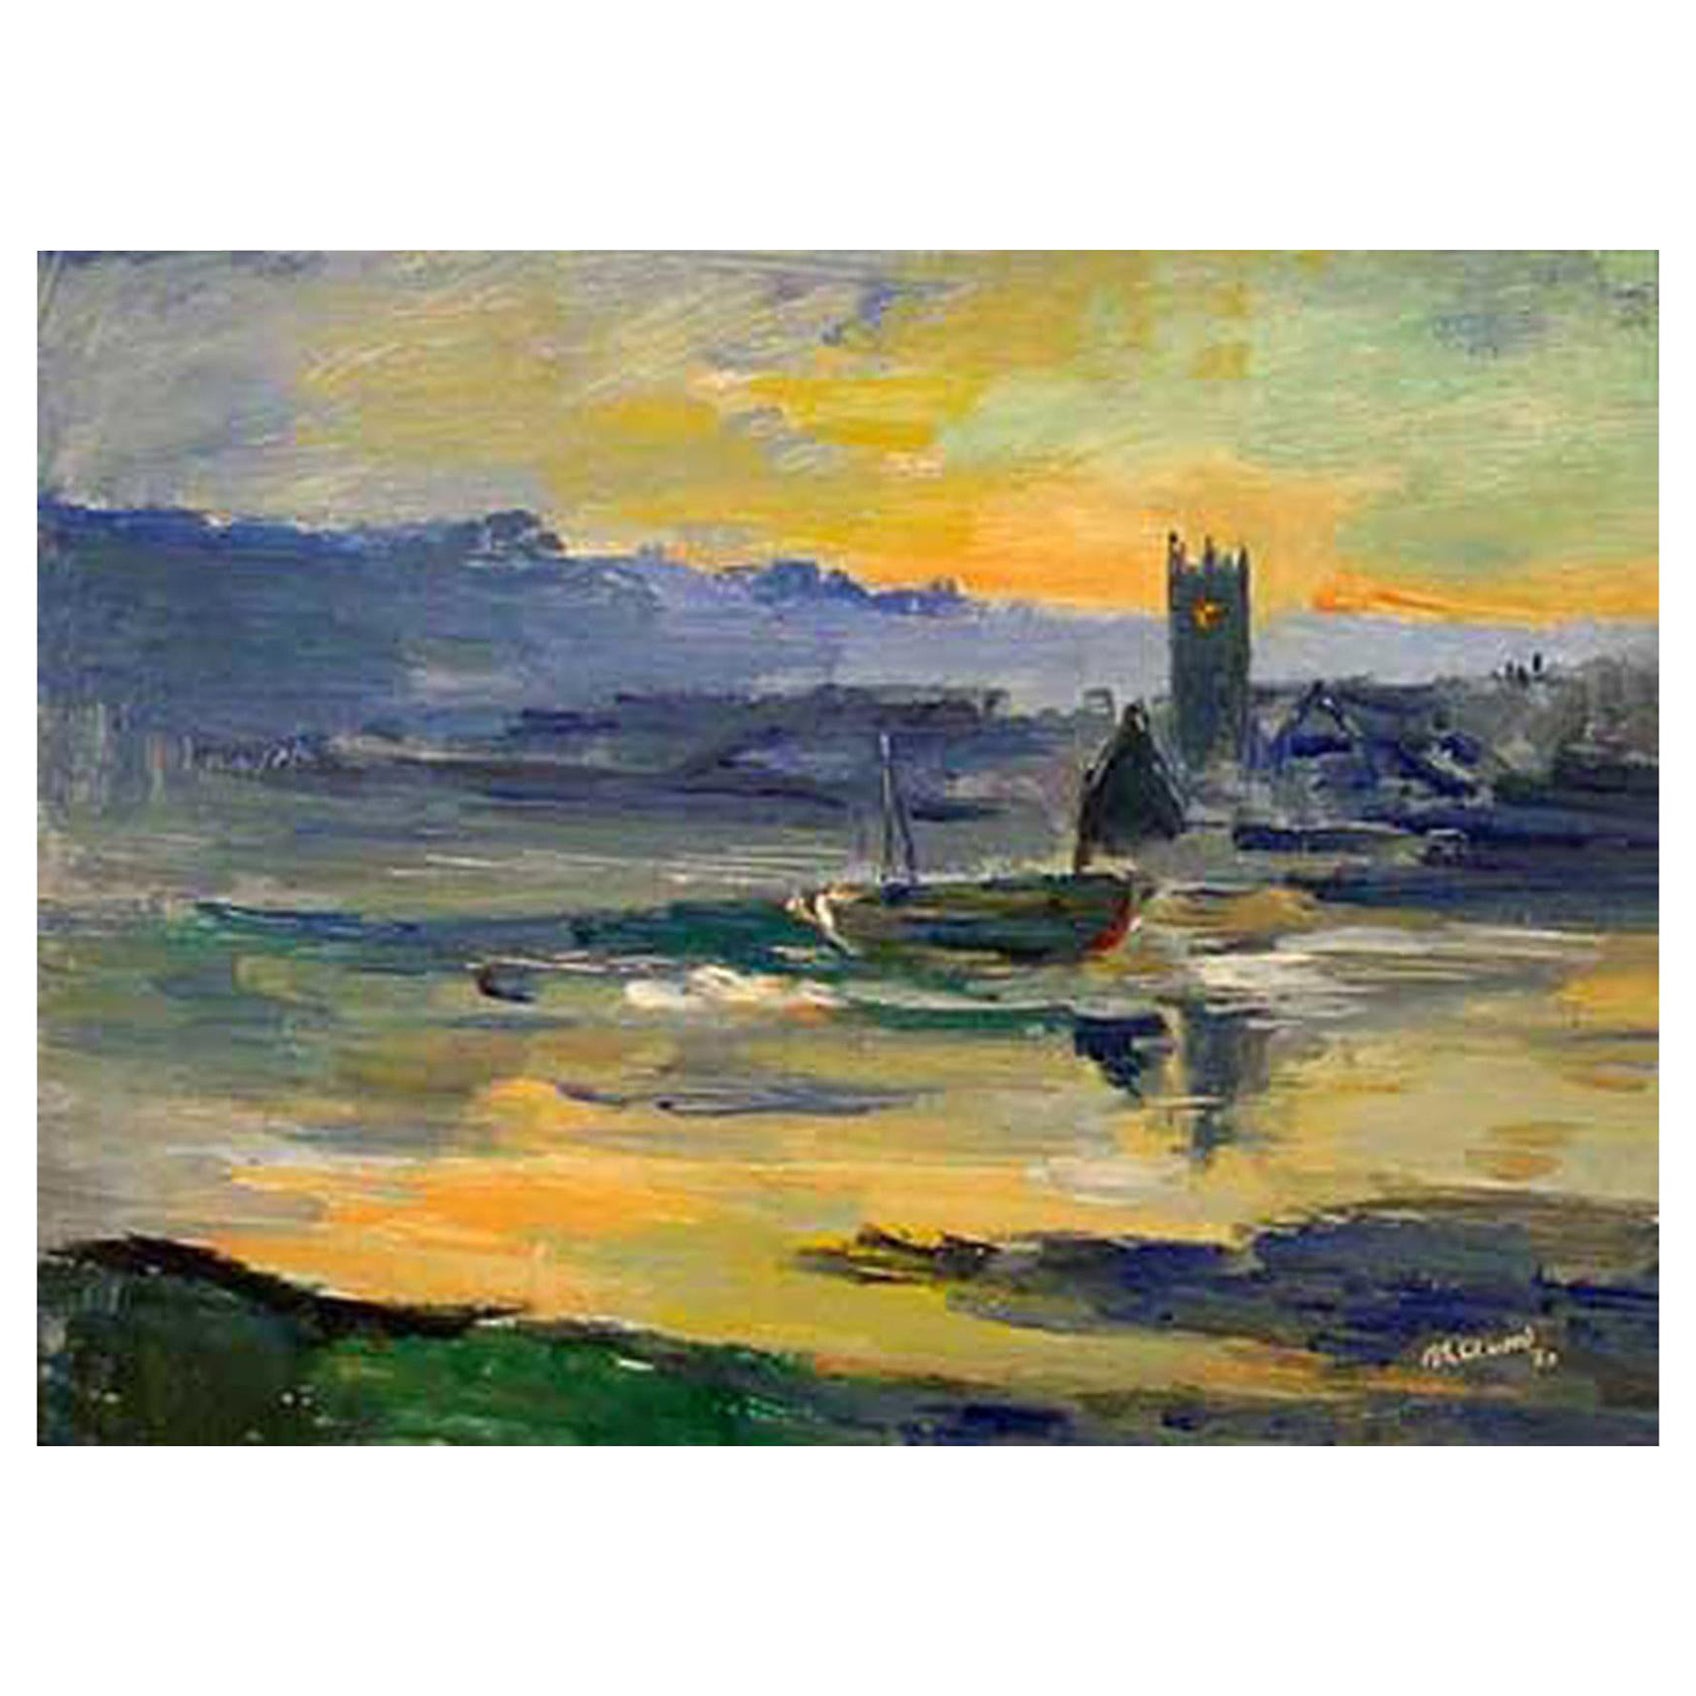 James Lawrence Isherwood 'English', St Ives, Oil on Board, circa 1960